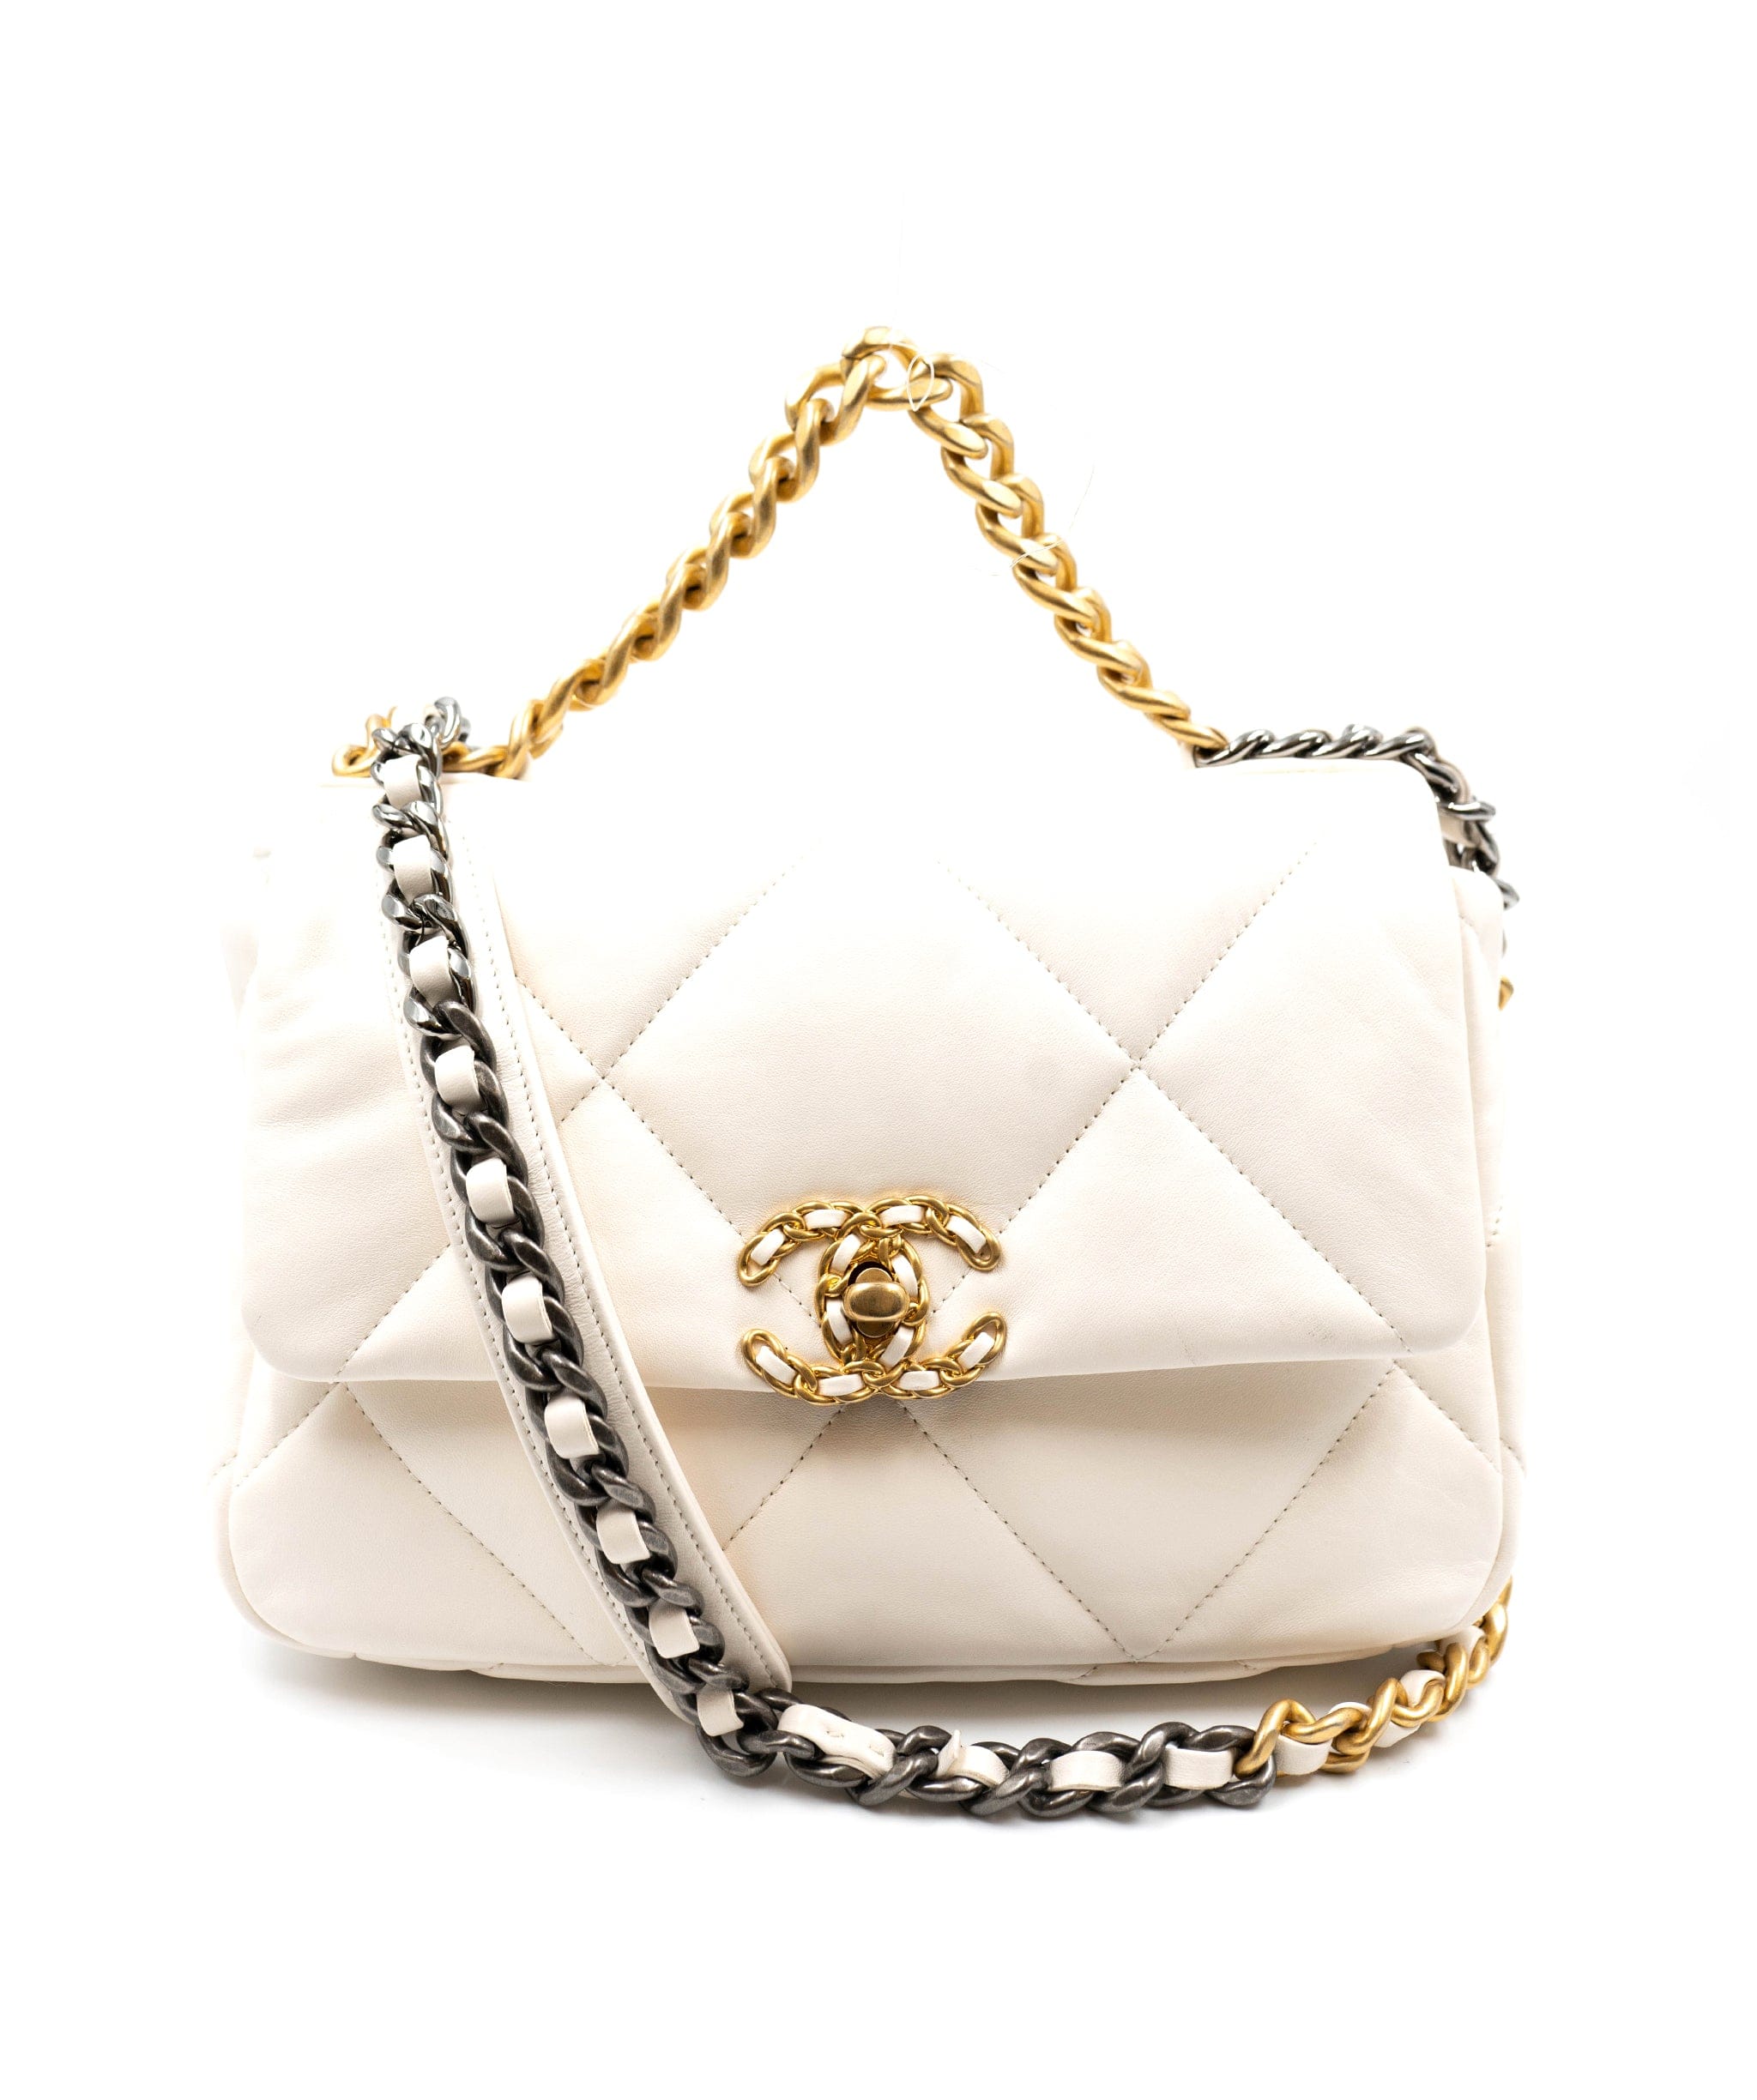 Chanel Chanel 19 Small white AGC1242